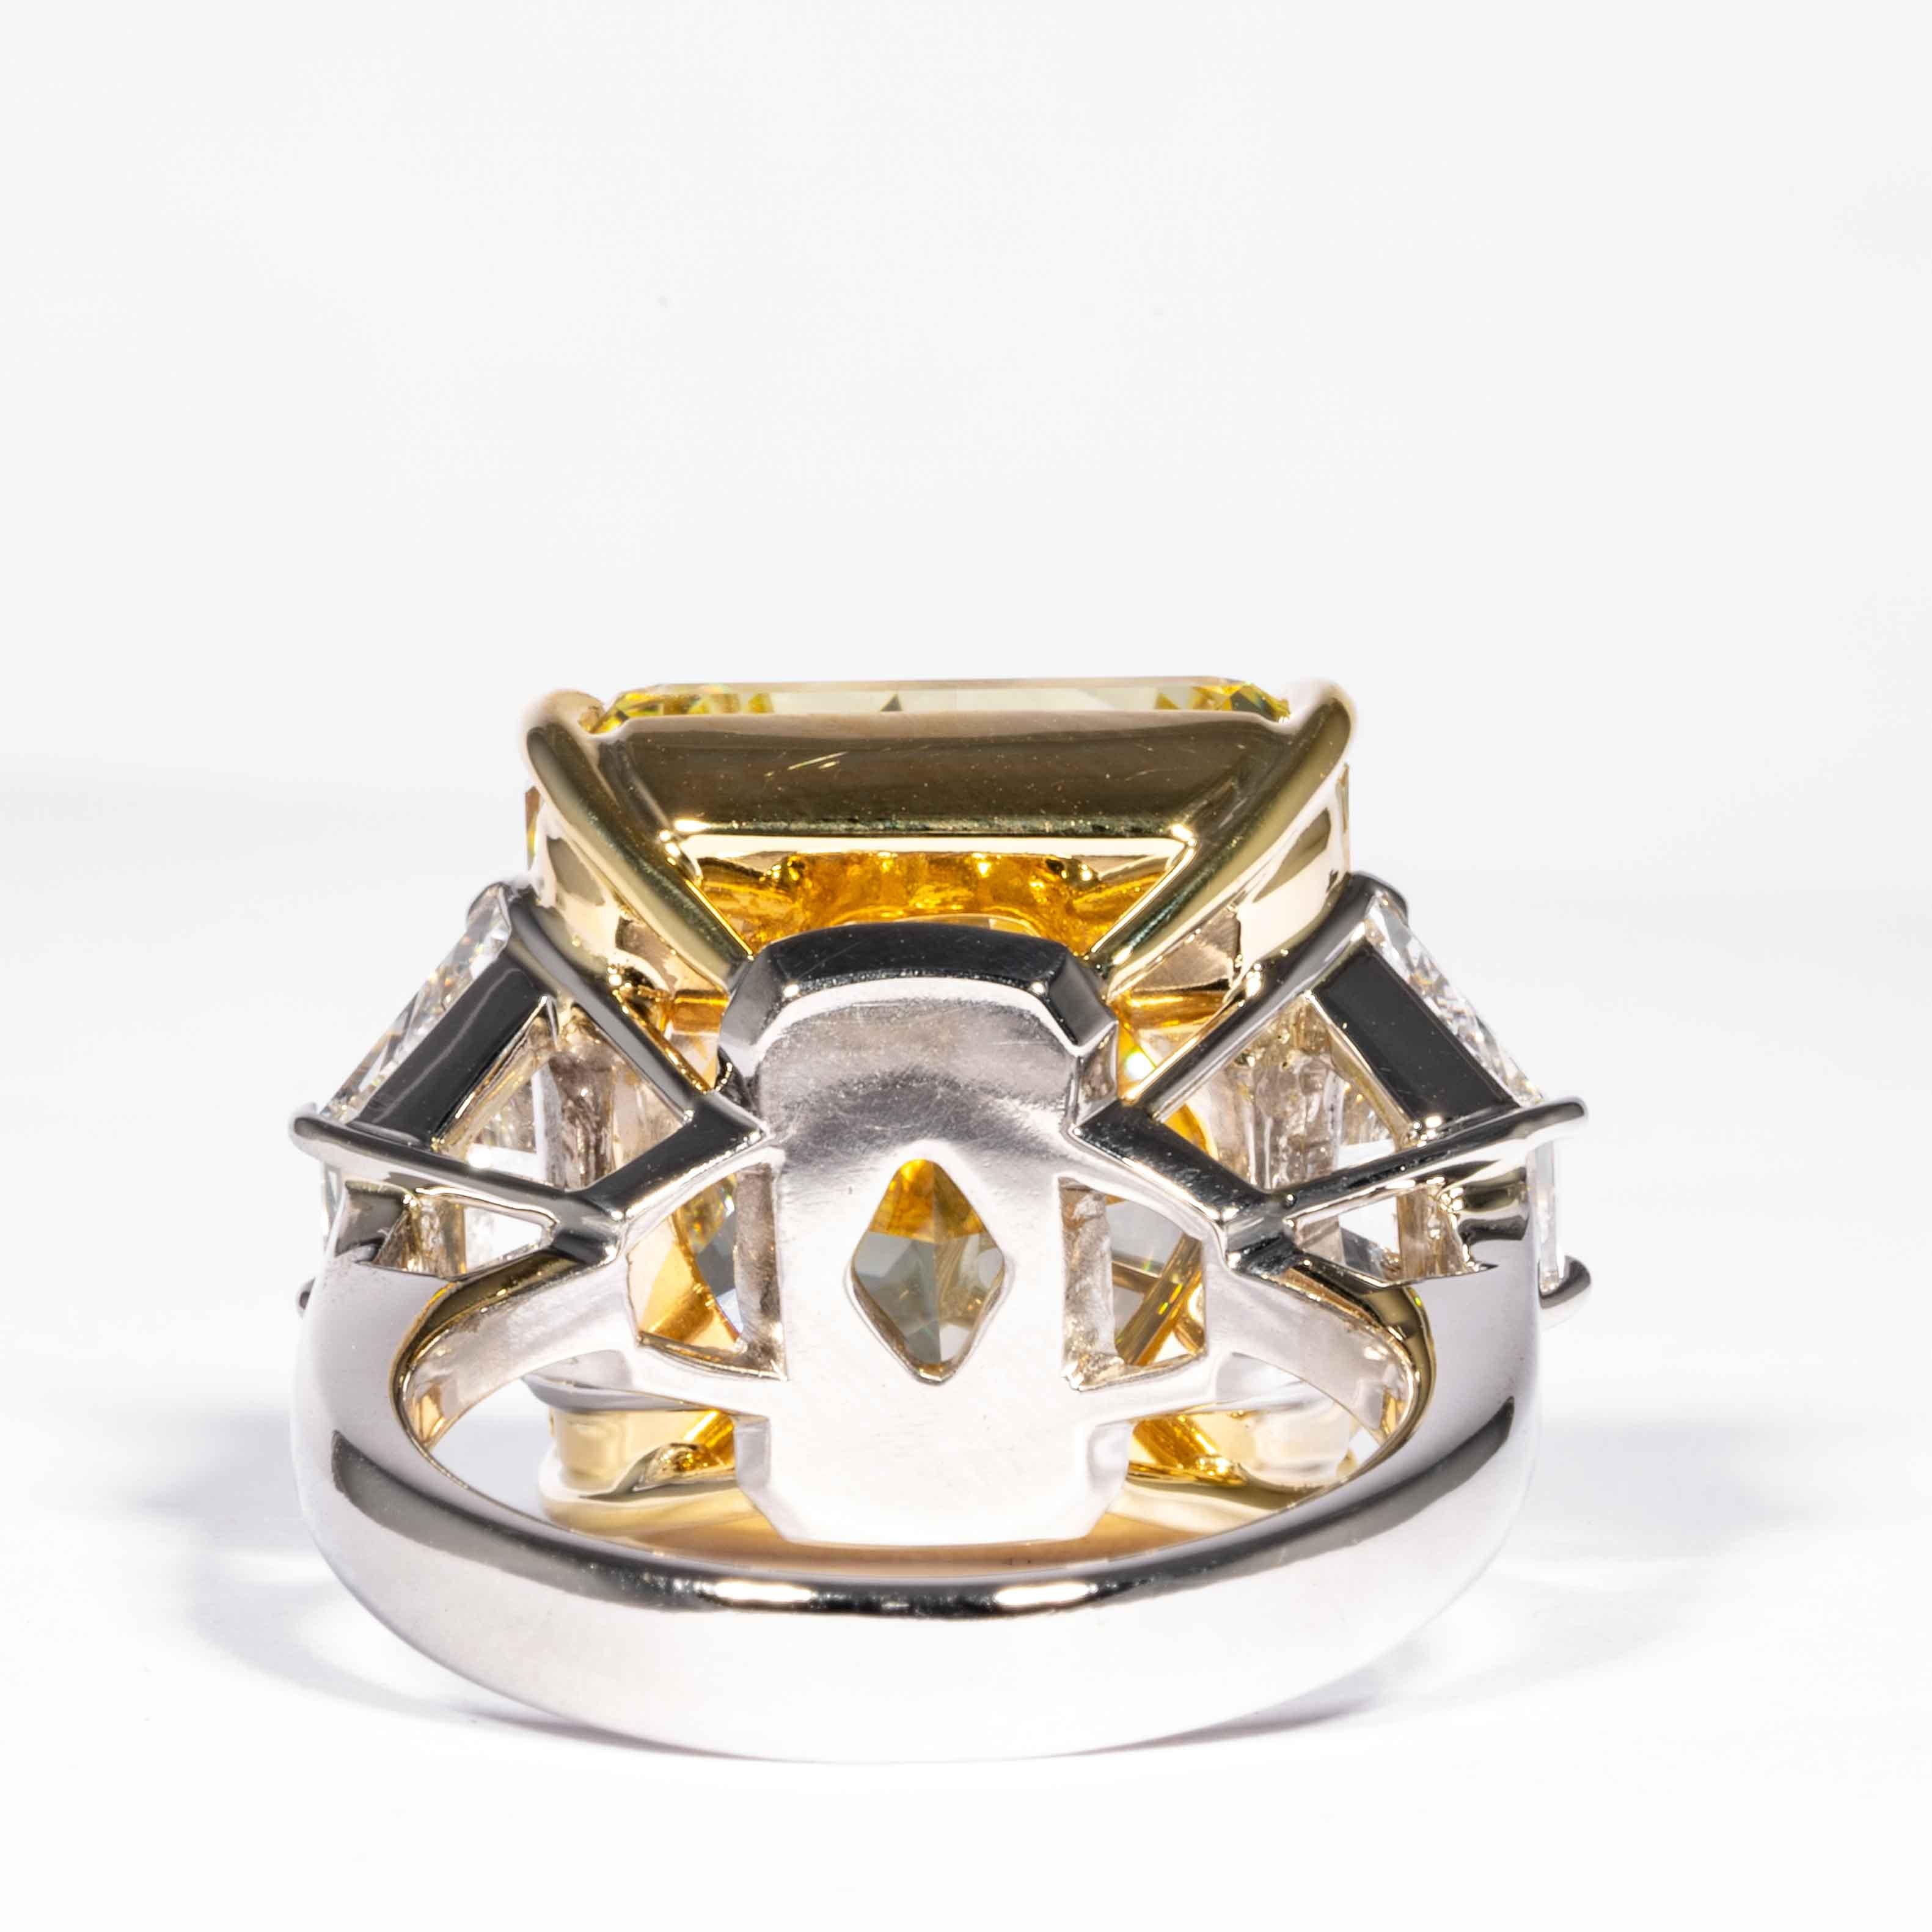 Shreve, Crump & Low GIA Certified 20.24 Carat Fancy Intense Yellow Diamond Ring In New Condition For Sale In Boston, MA